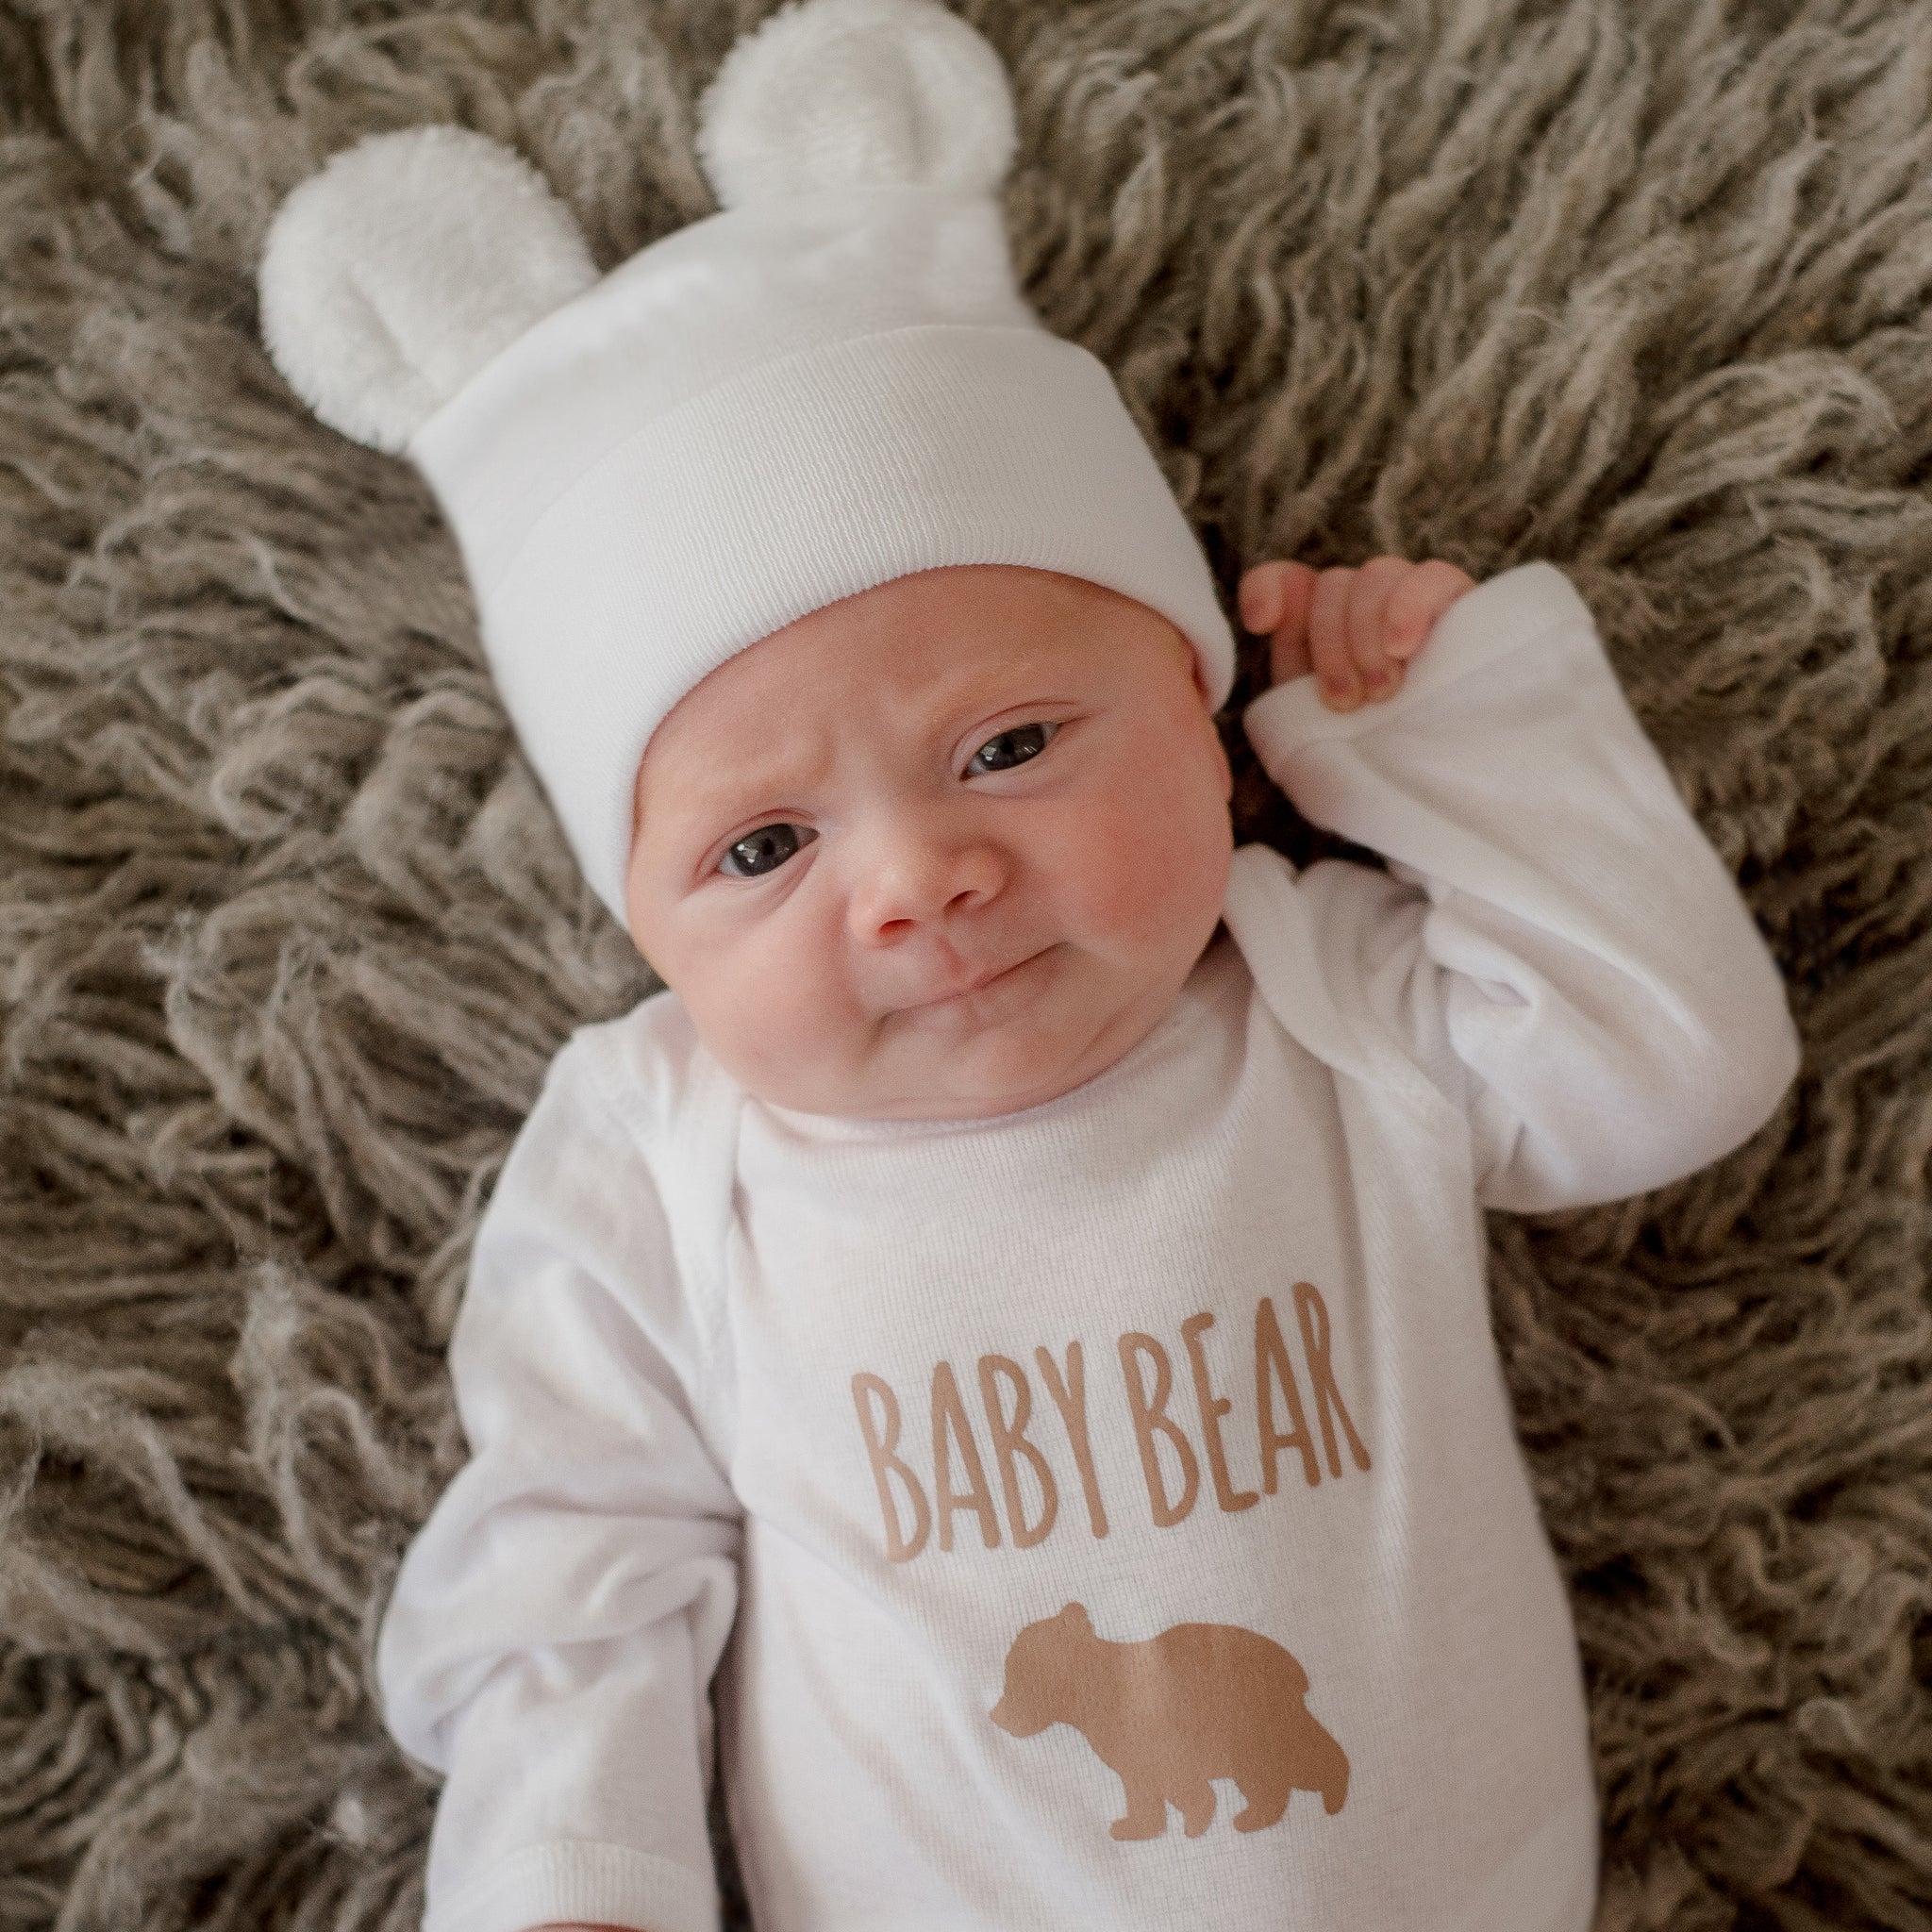 Baby Bear Fuzzy White Bear Hat with Matching Baby Bear Onesie- Gender Neutral Take Home Outfit for Newborns